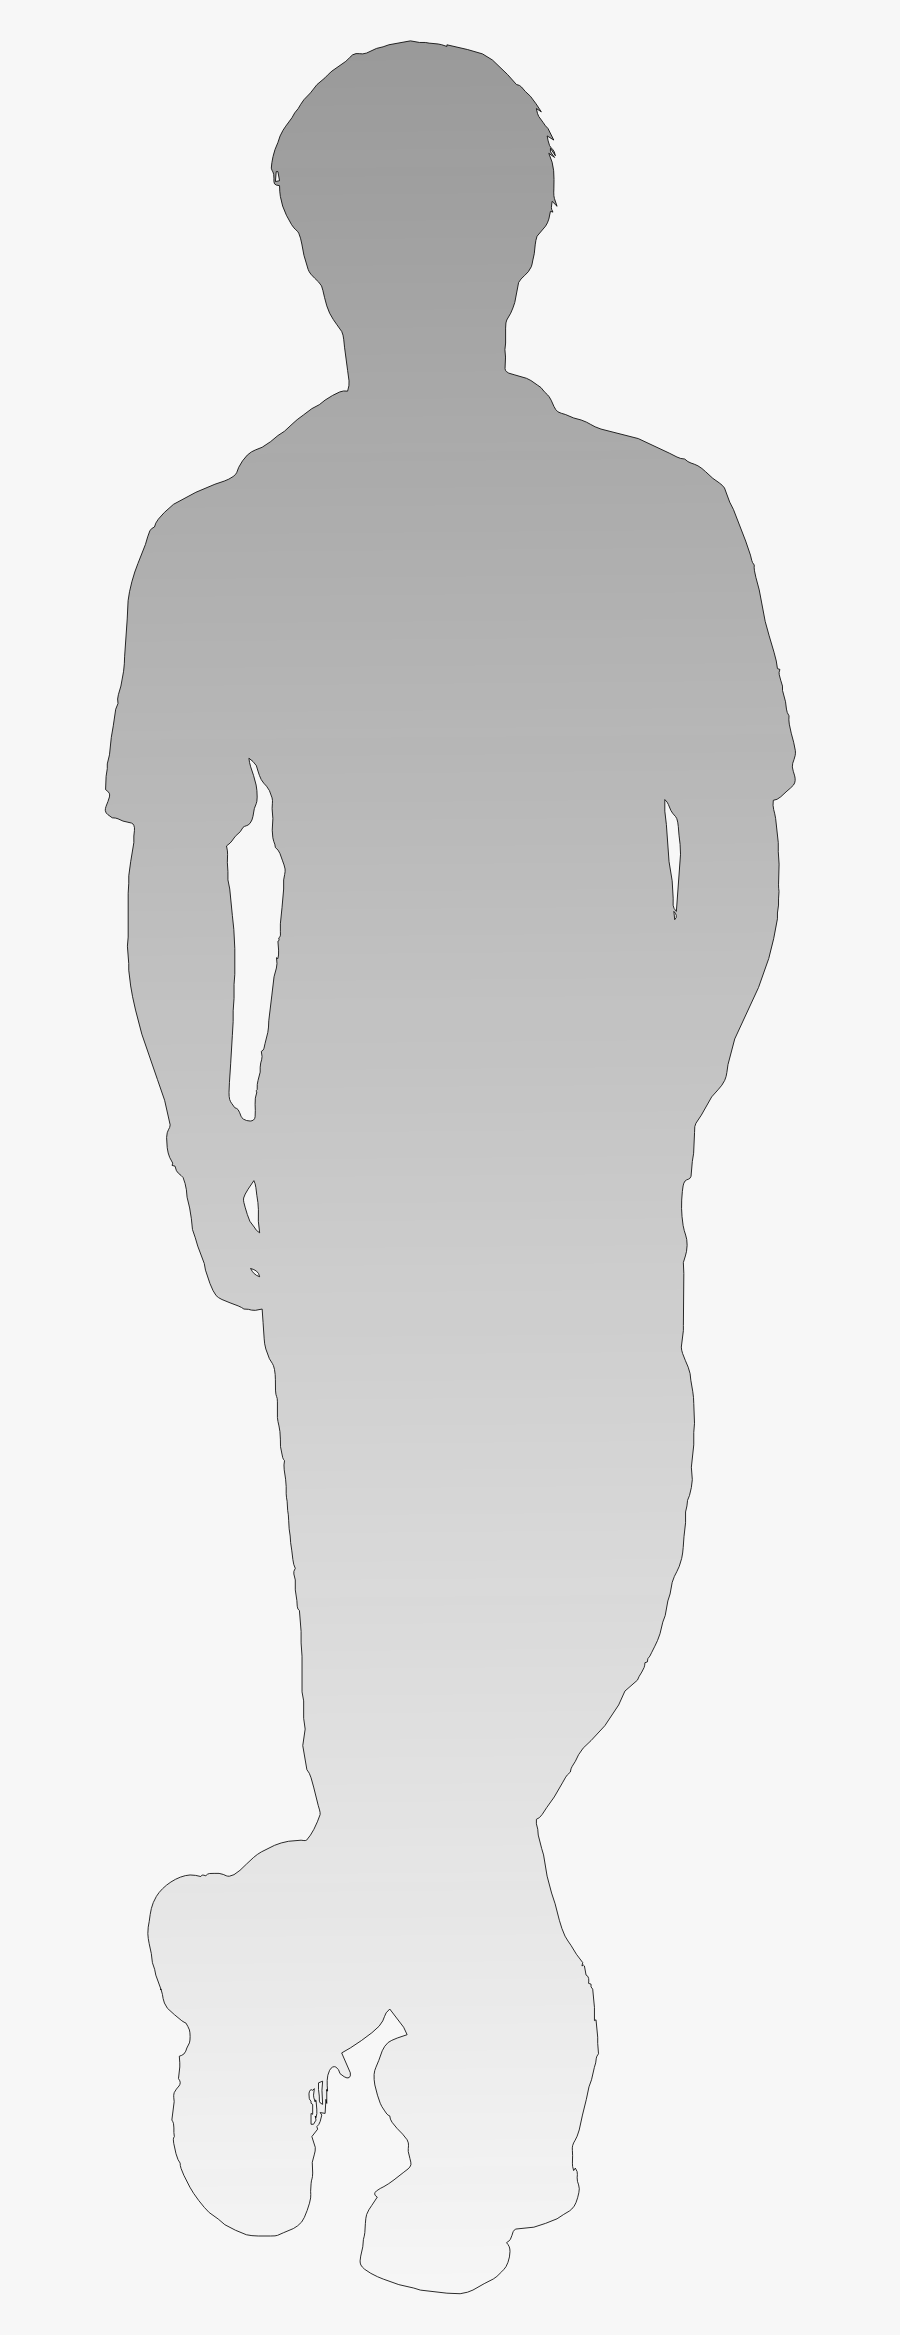 Shadow Of Person - Man White Shadow Png, Transparent Clipart